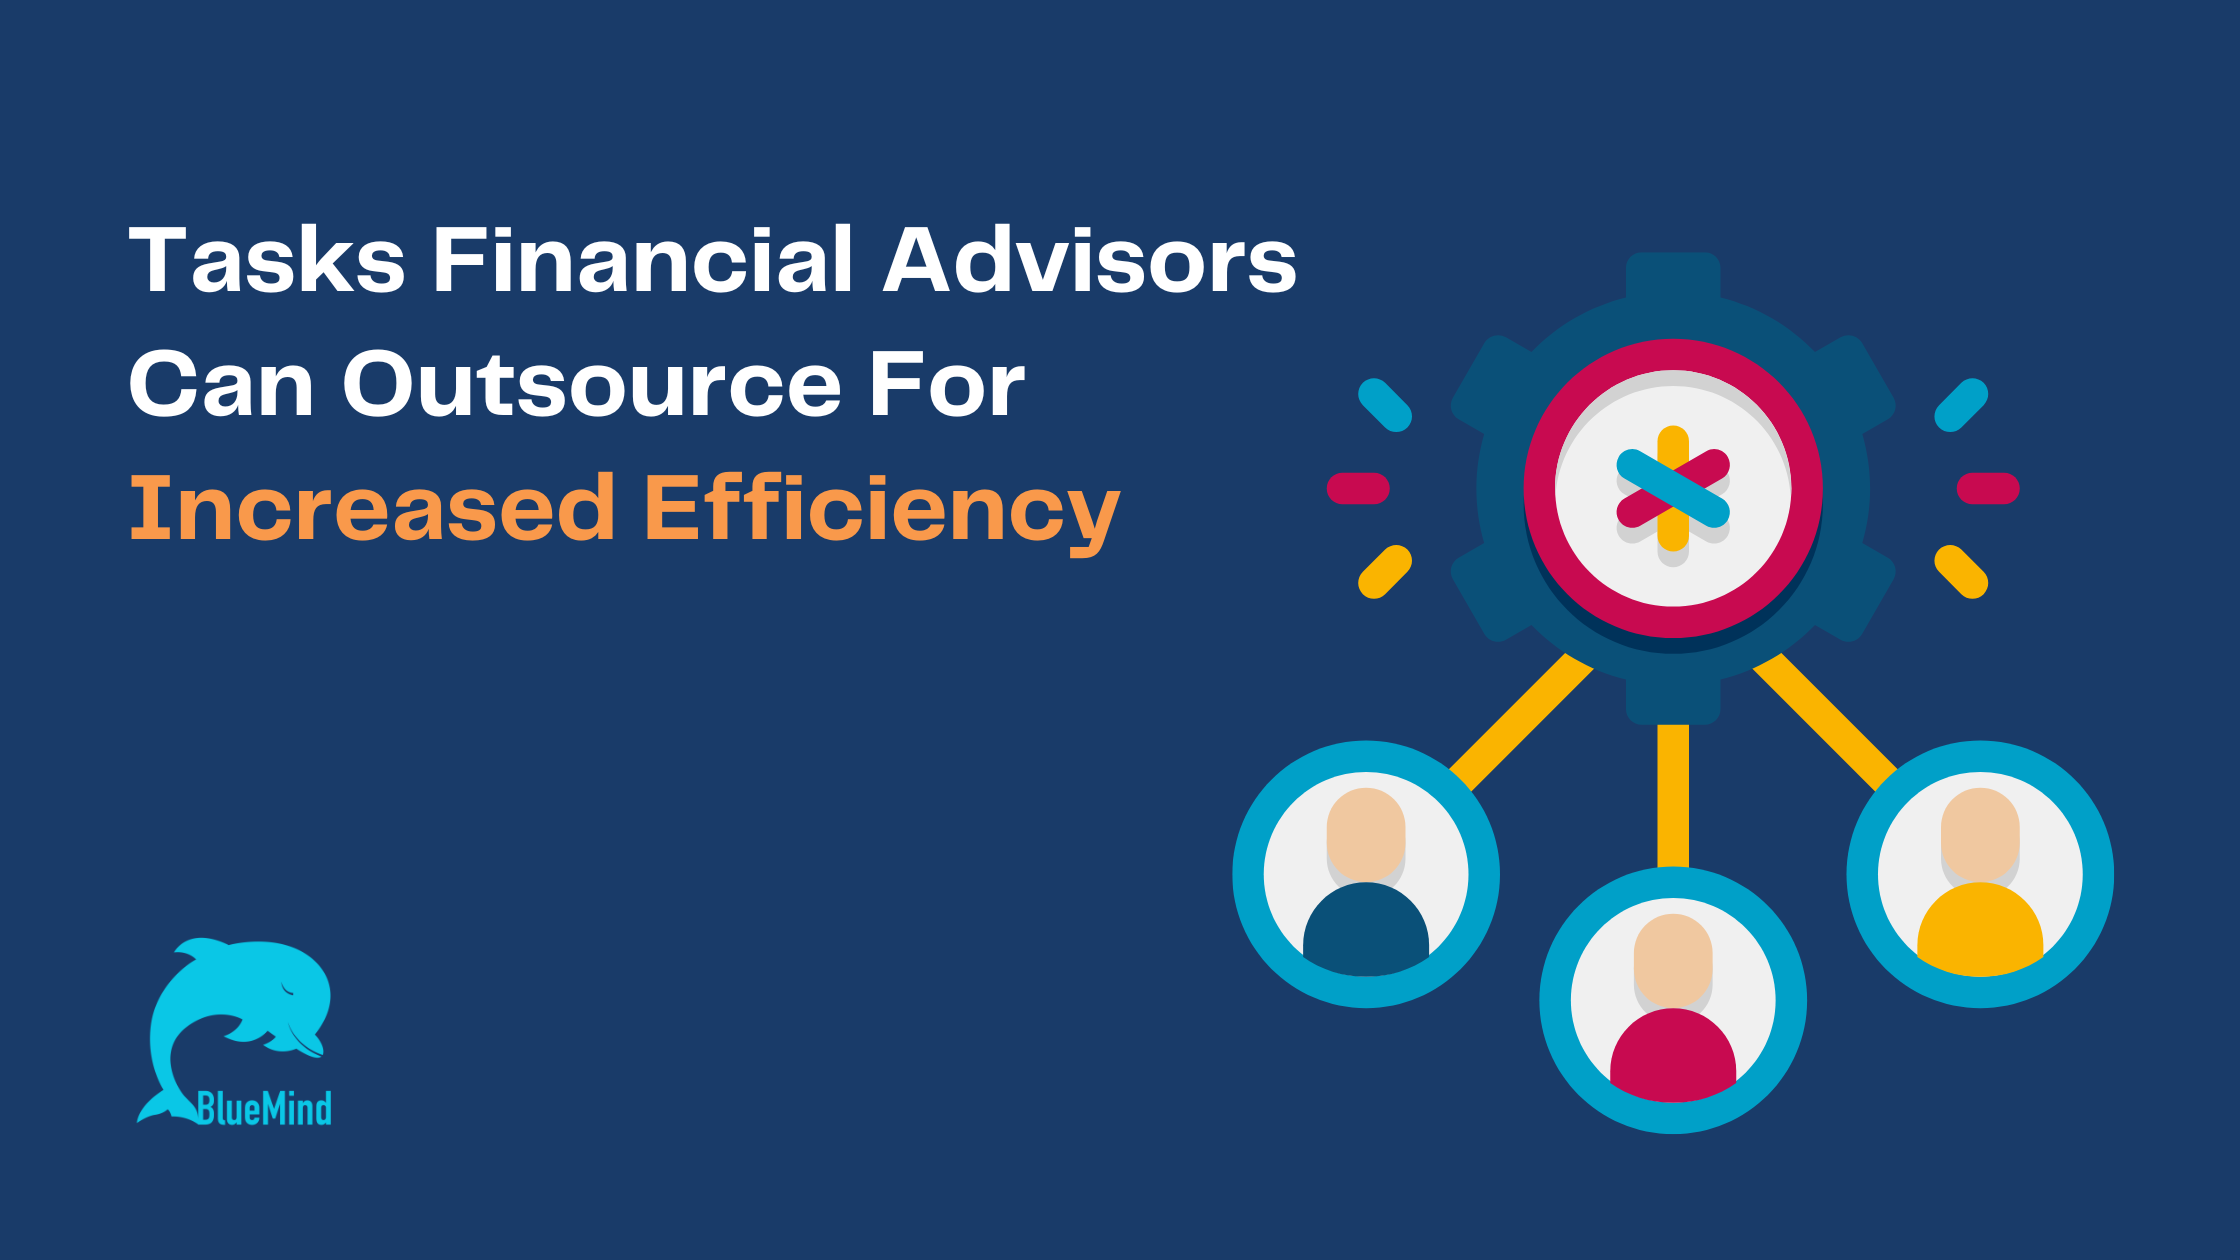 Tasks Financial Advisors Can Outsource For Increased Efficiency